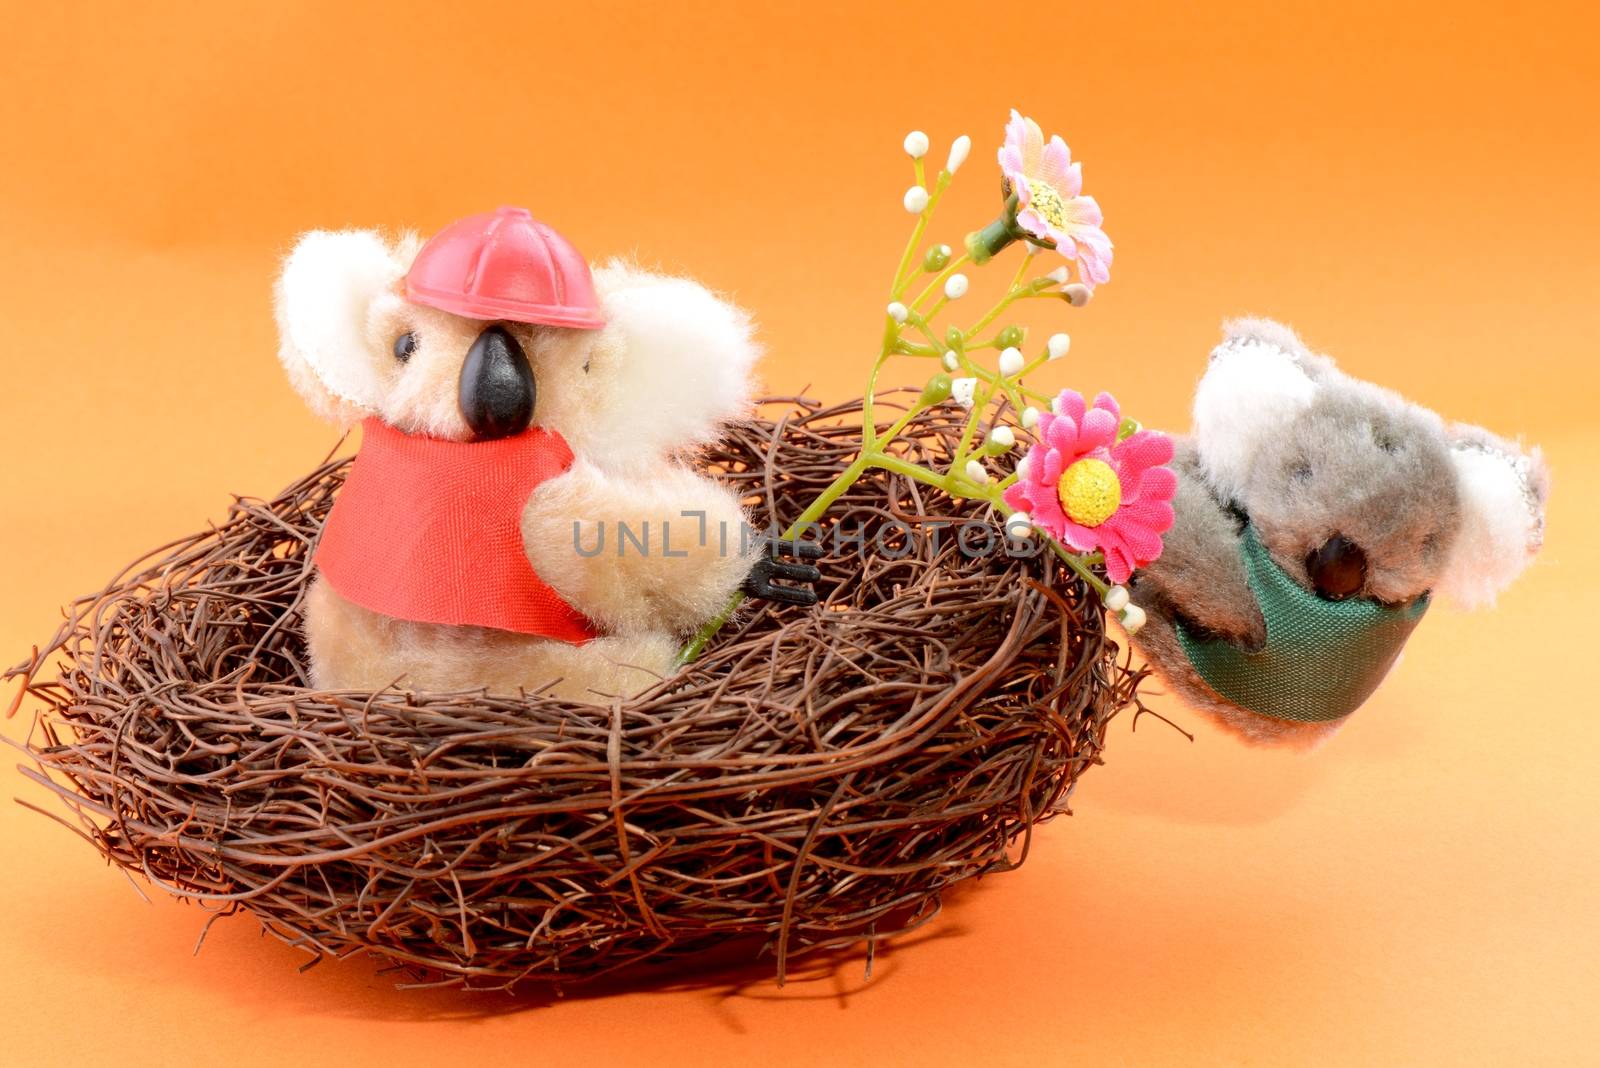 Nest with two Toy Koala by bbbar